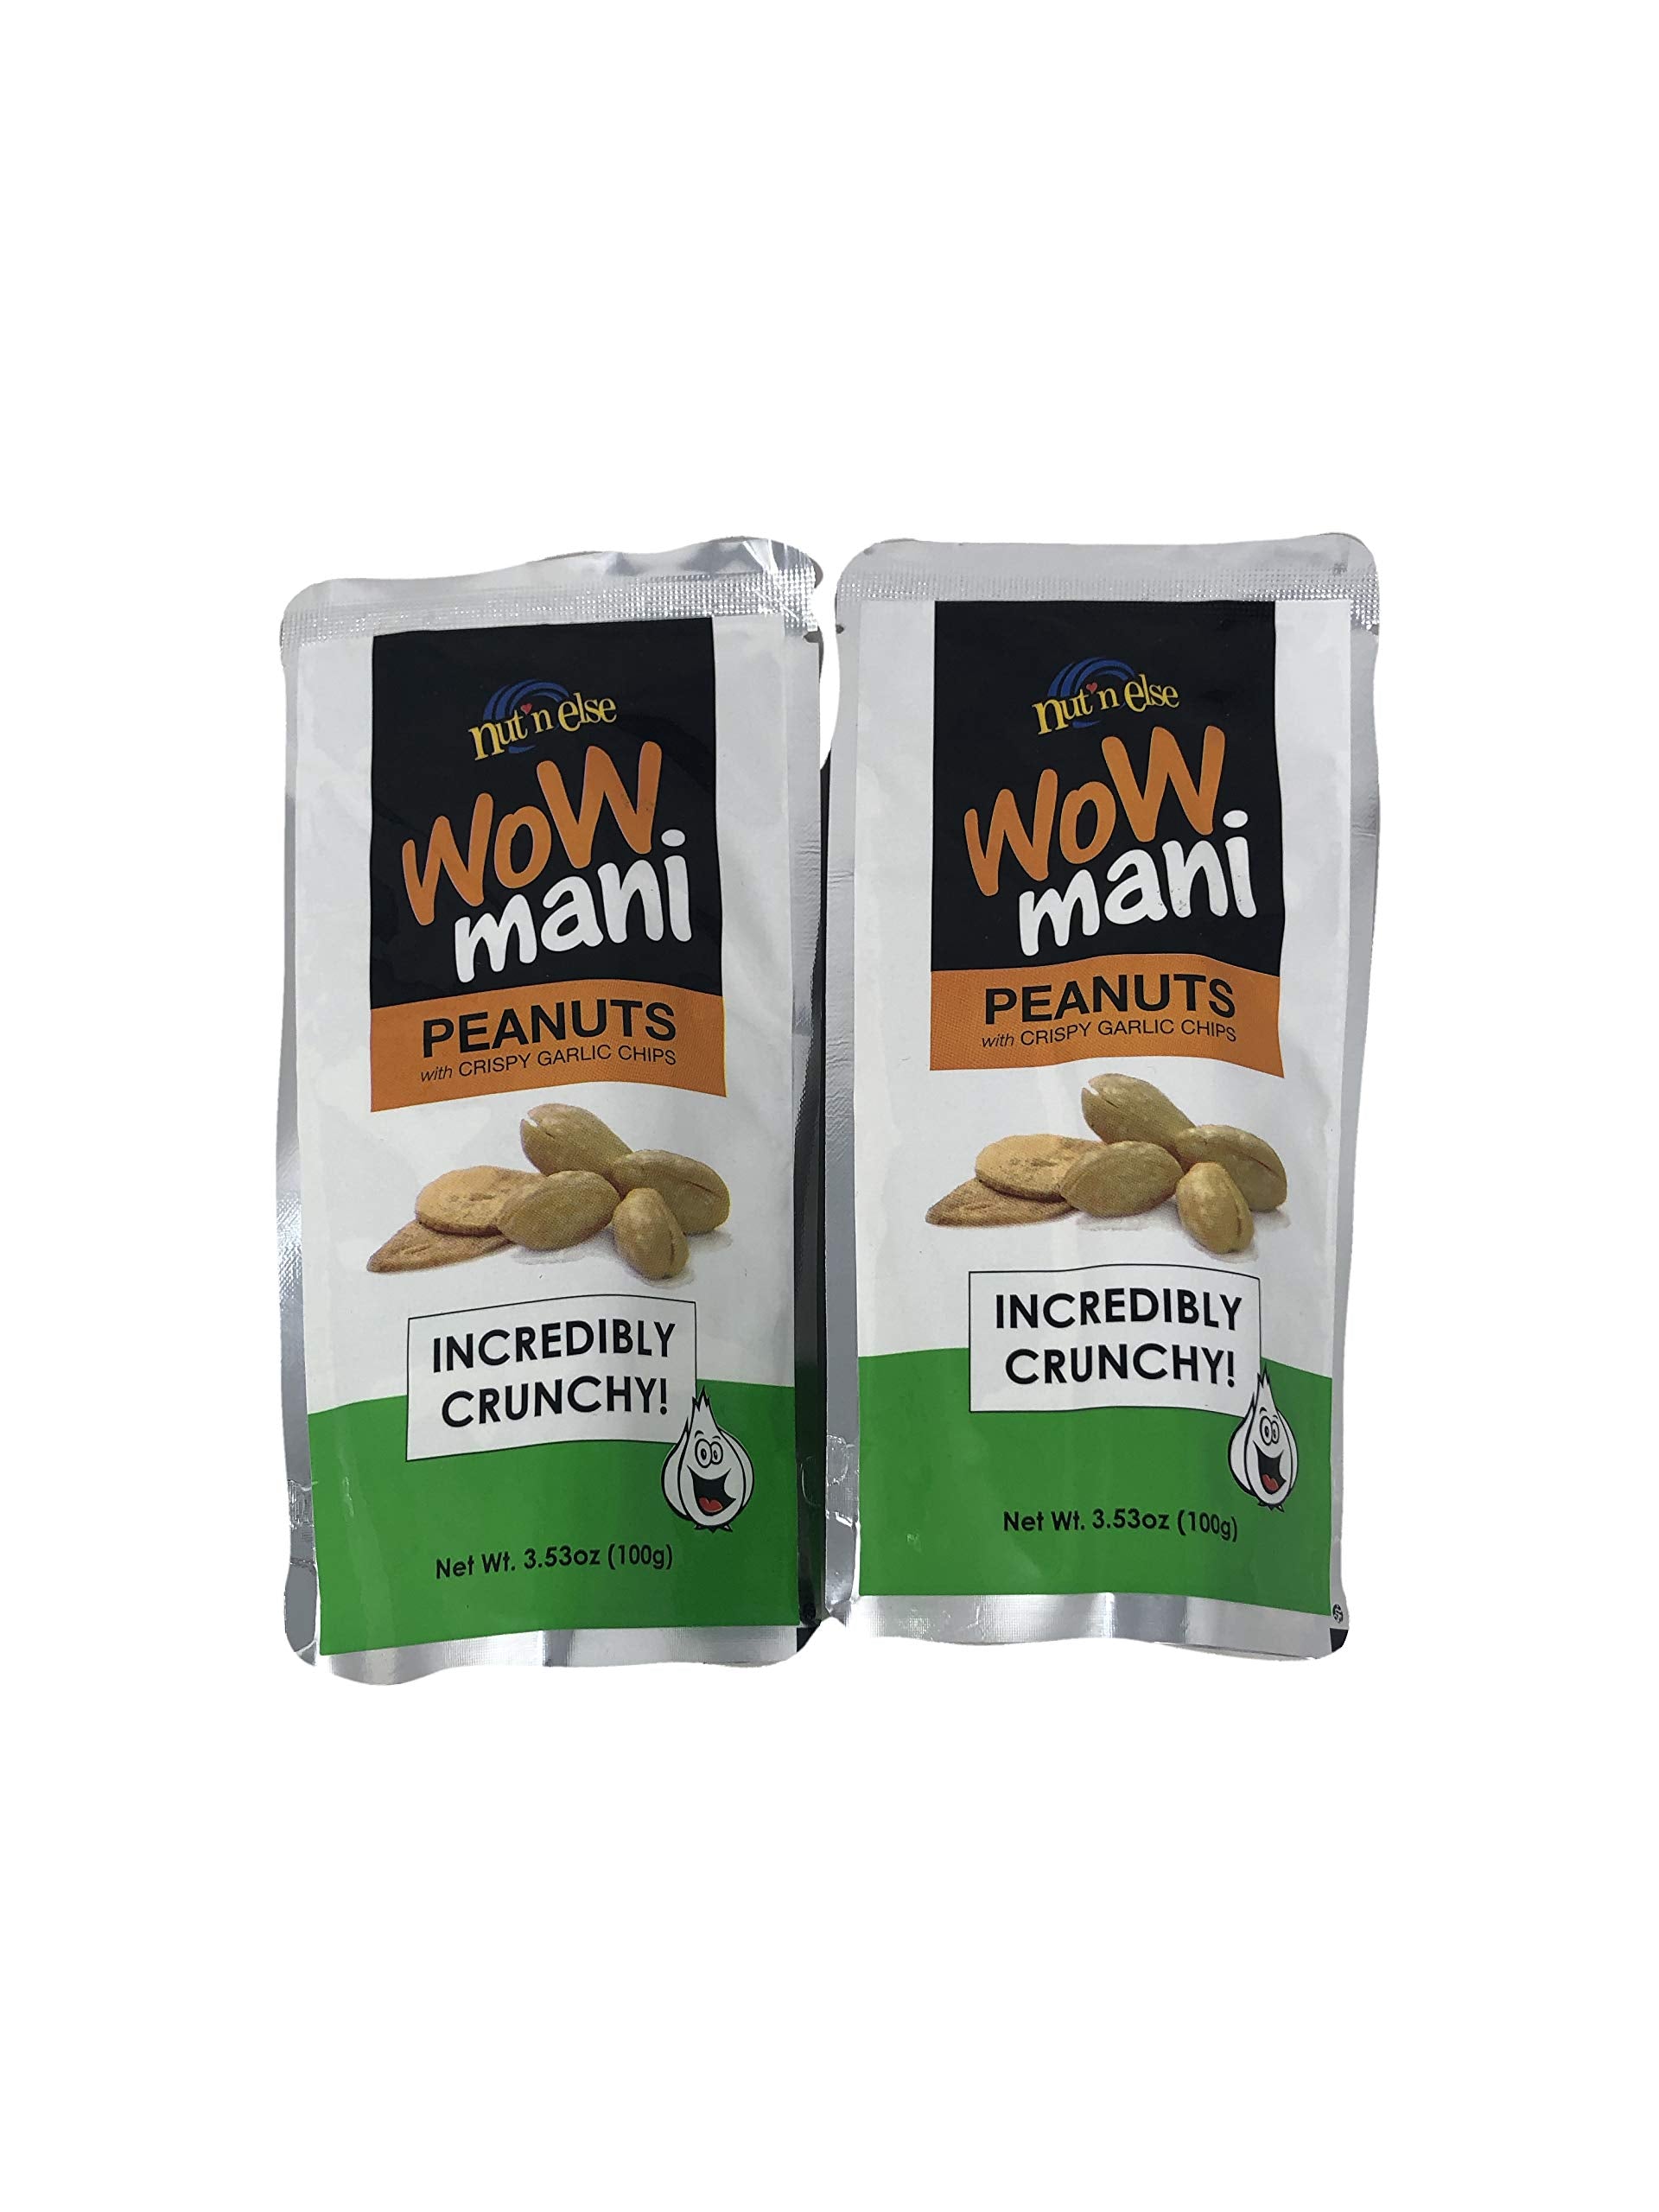 Wow Mani with Garlic Peanuts with Crispy Garlic Chips Pack of Two 3.53 Oc a Pack